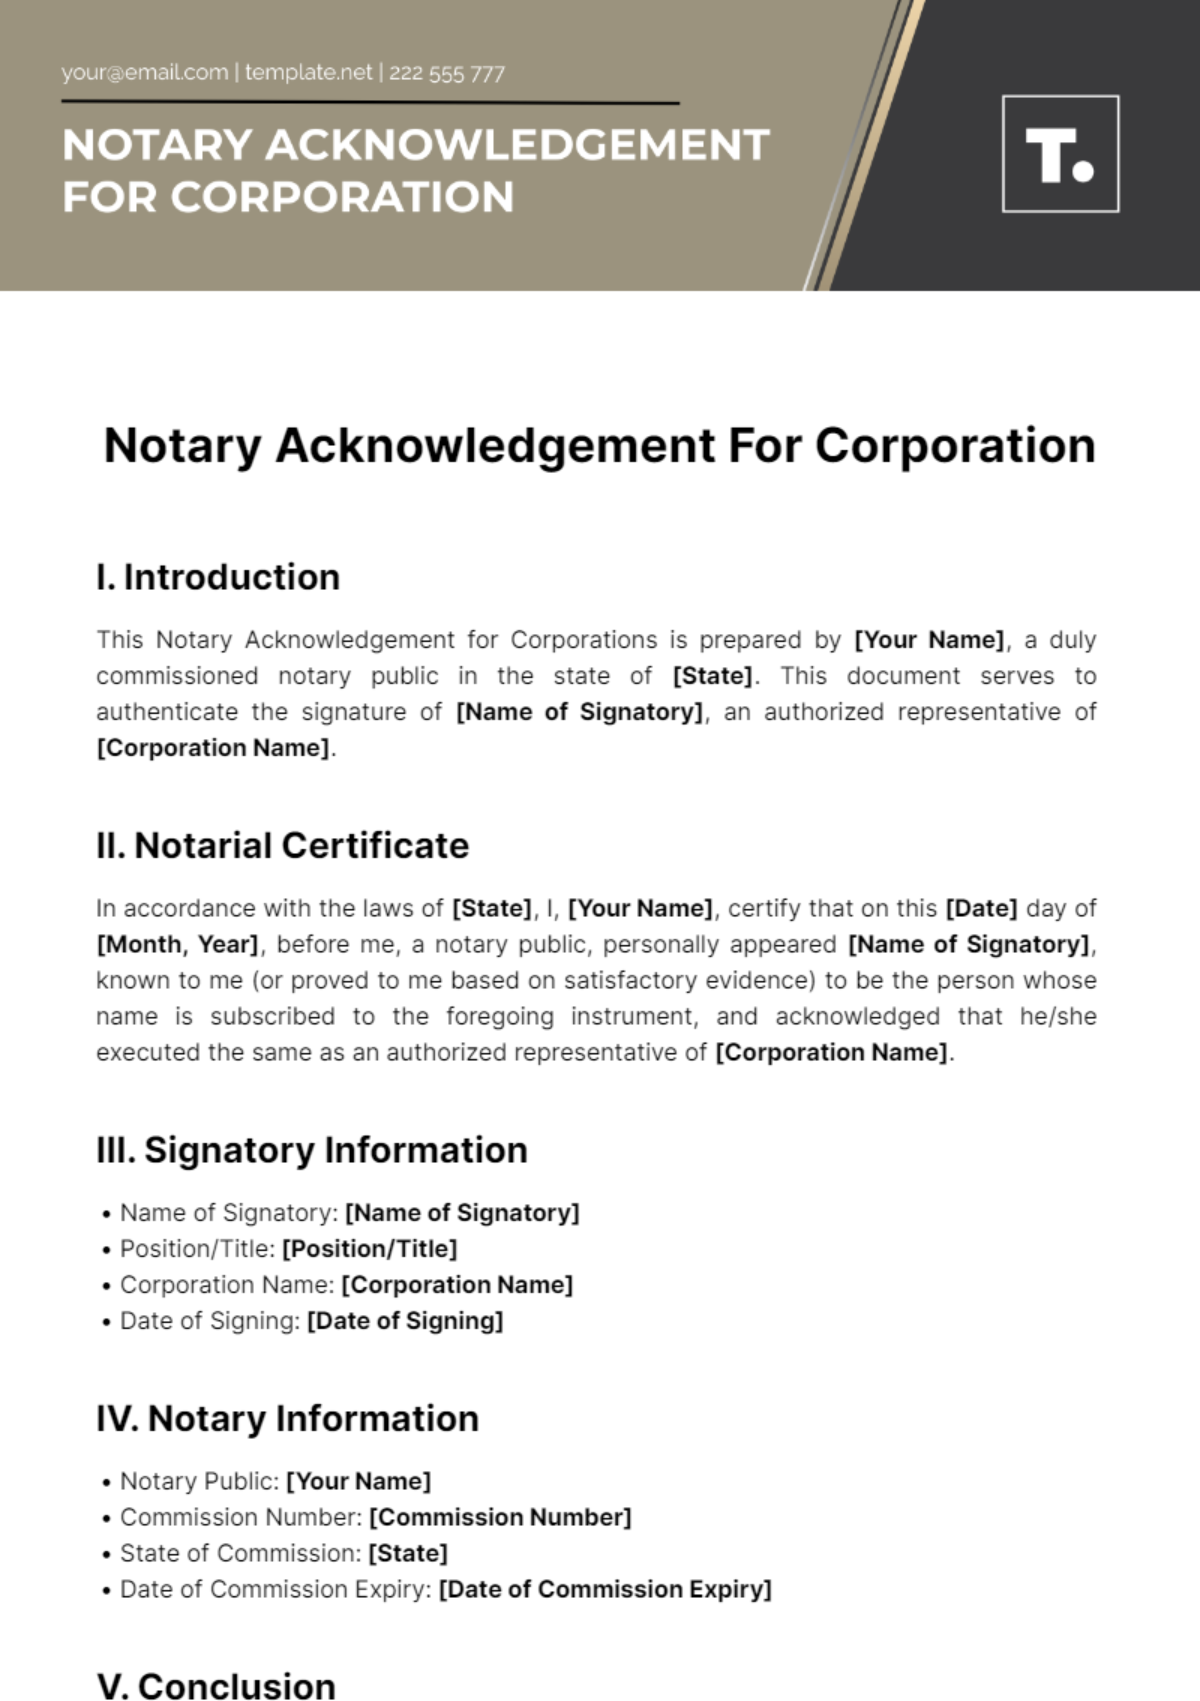 Free Notary Acknowledgement For Corporation Template